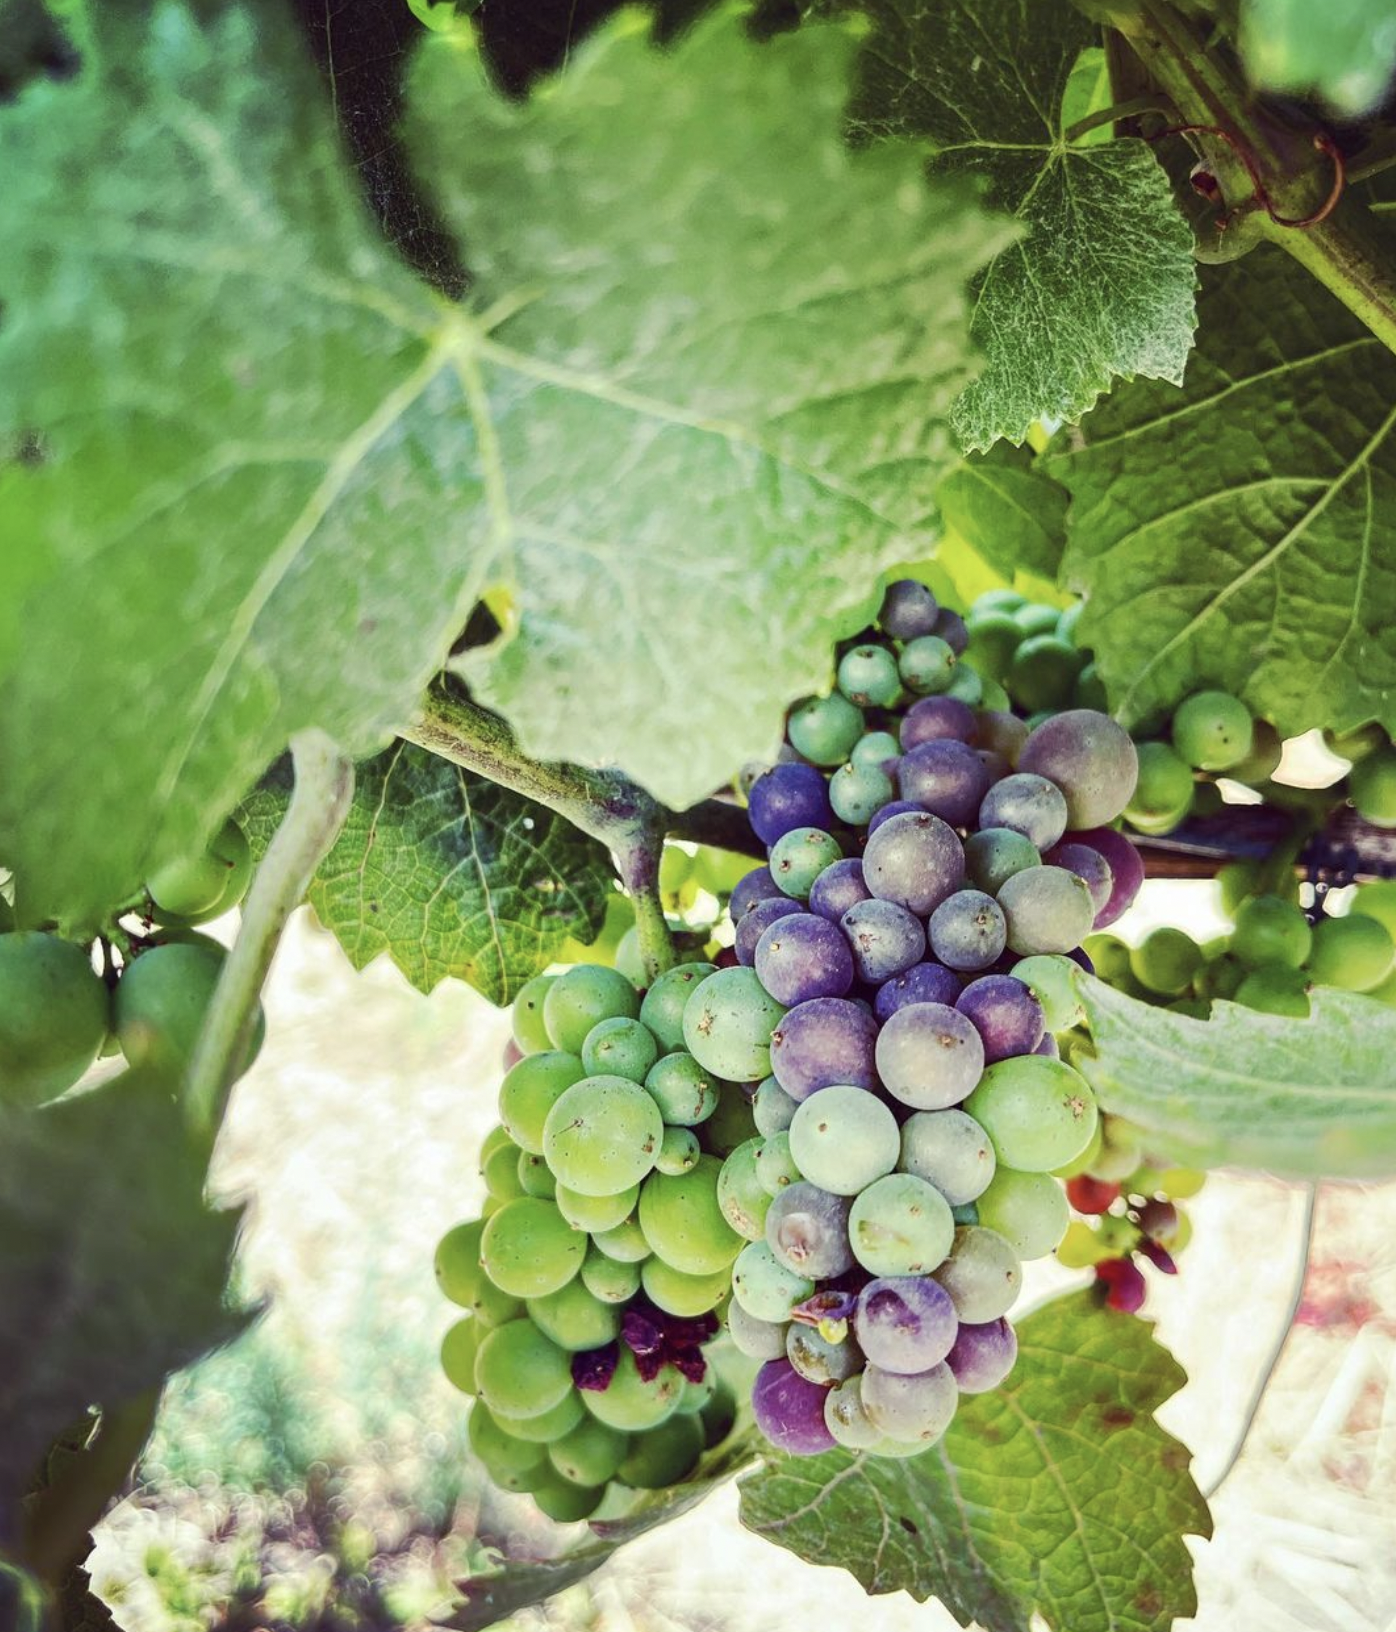 First report of Veraison for the 2022 vintage!